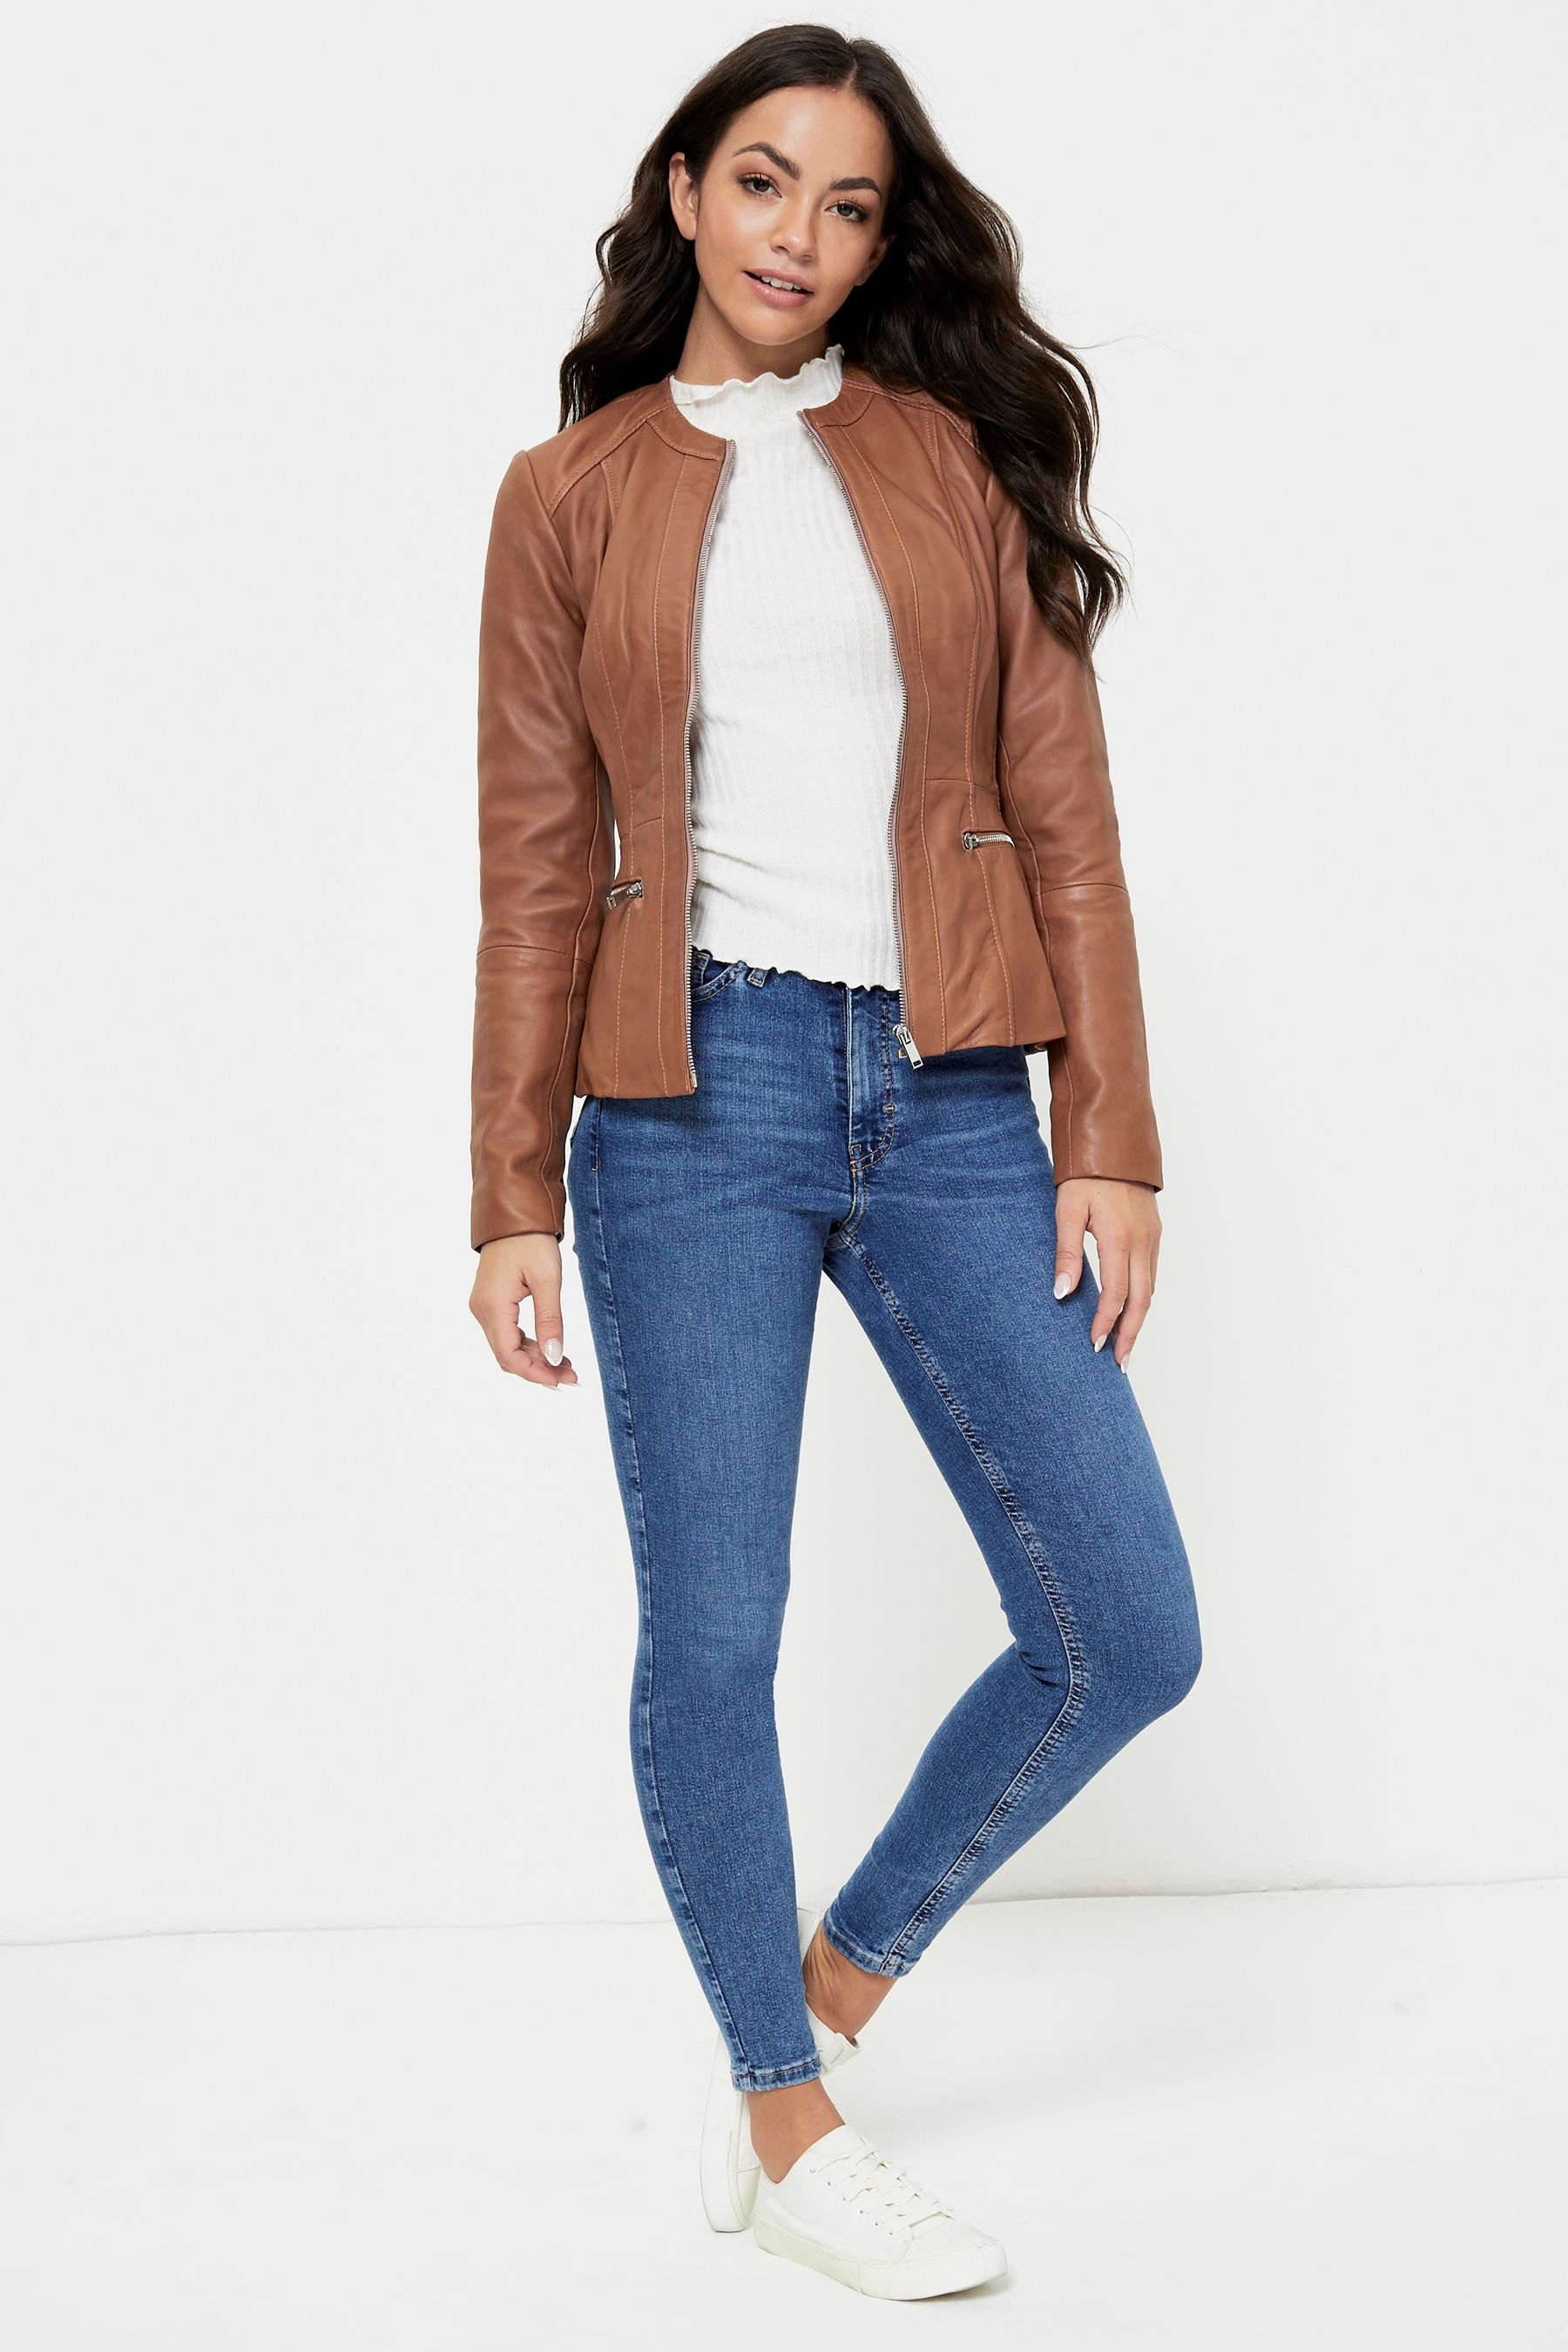 Buy Urban Code Brown Collarless Leather Jacket from the Next UK online shop